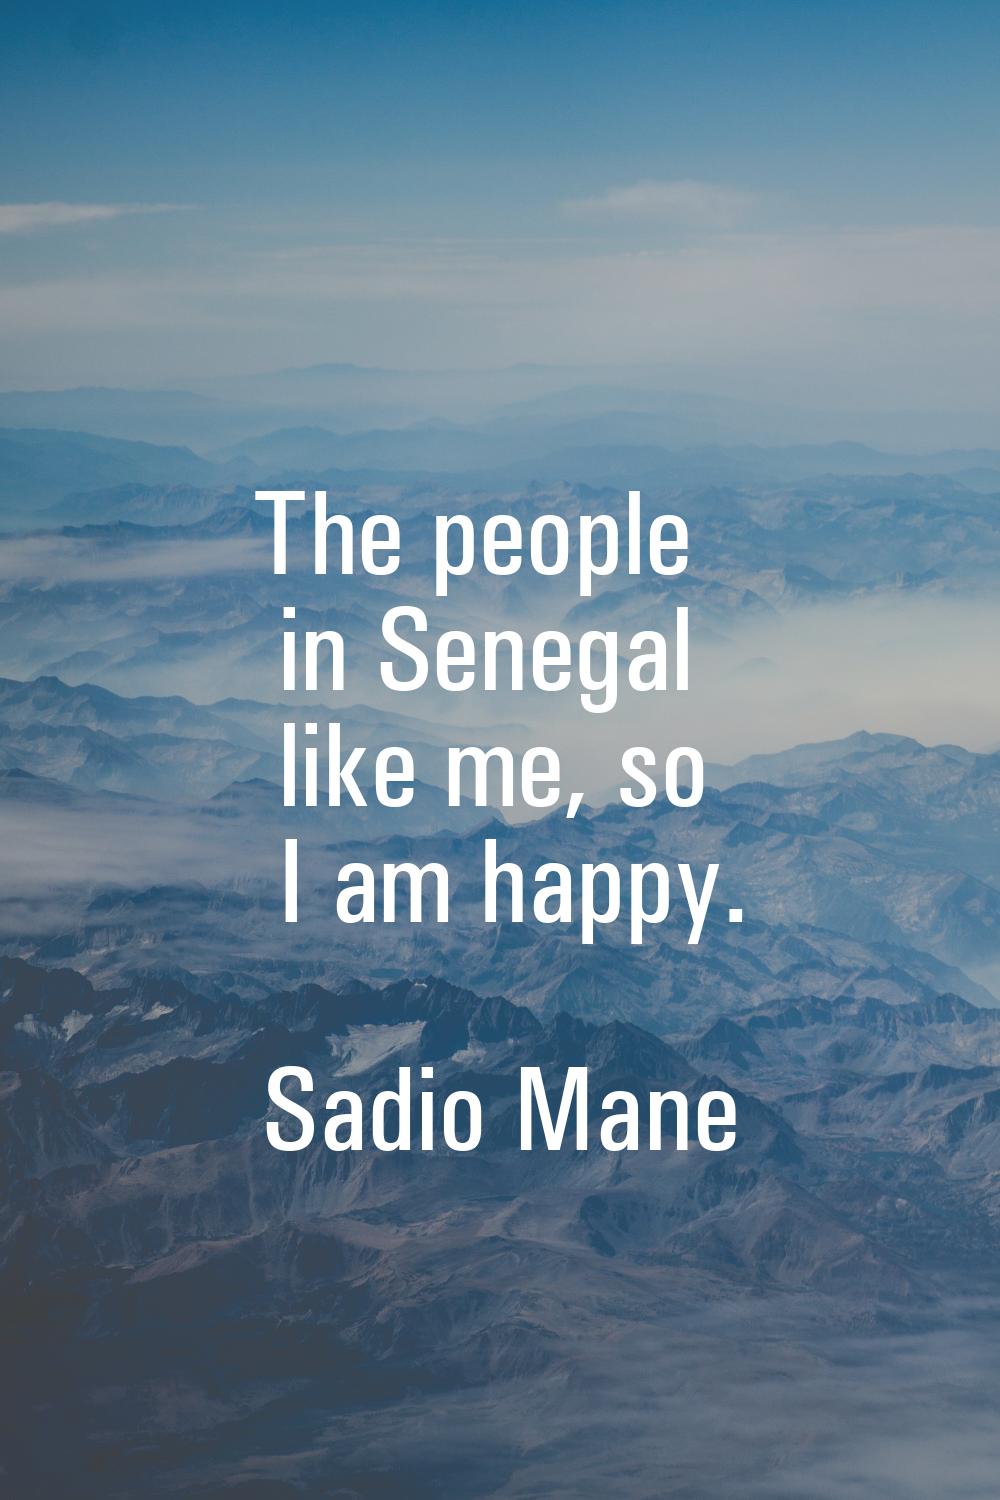 The people in Senegal like me, so I am happy.